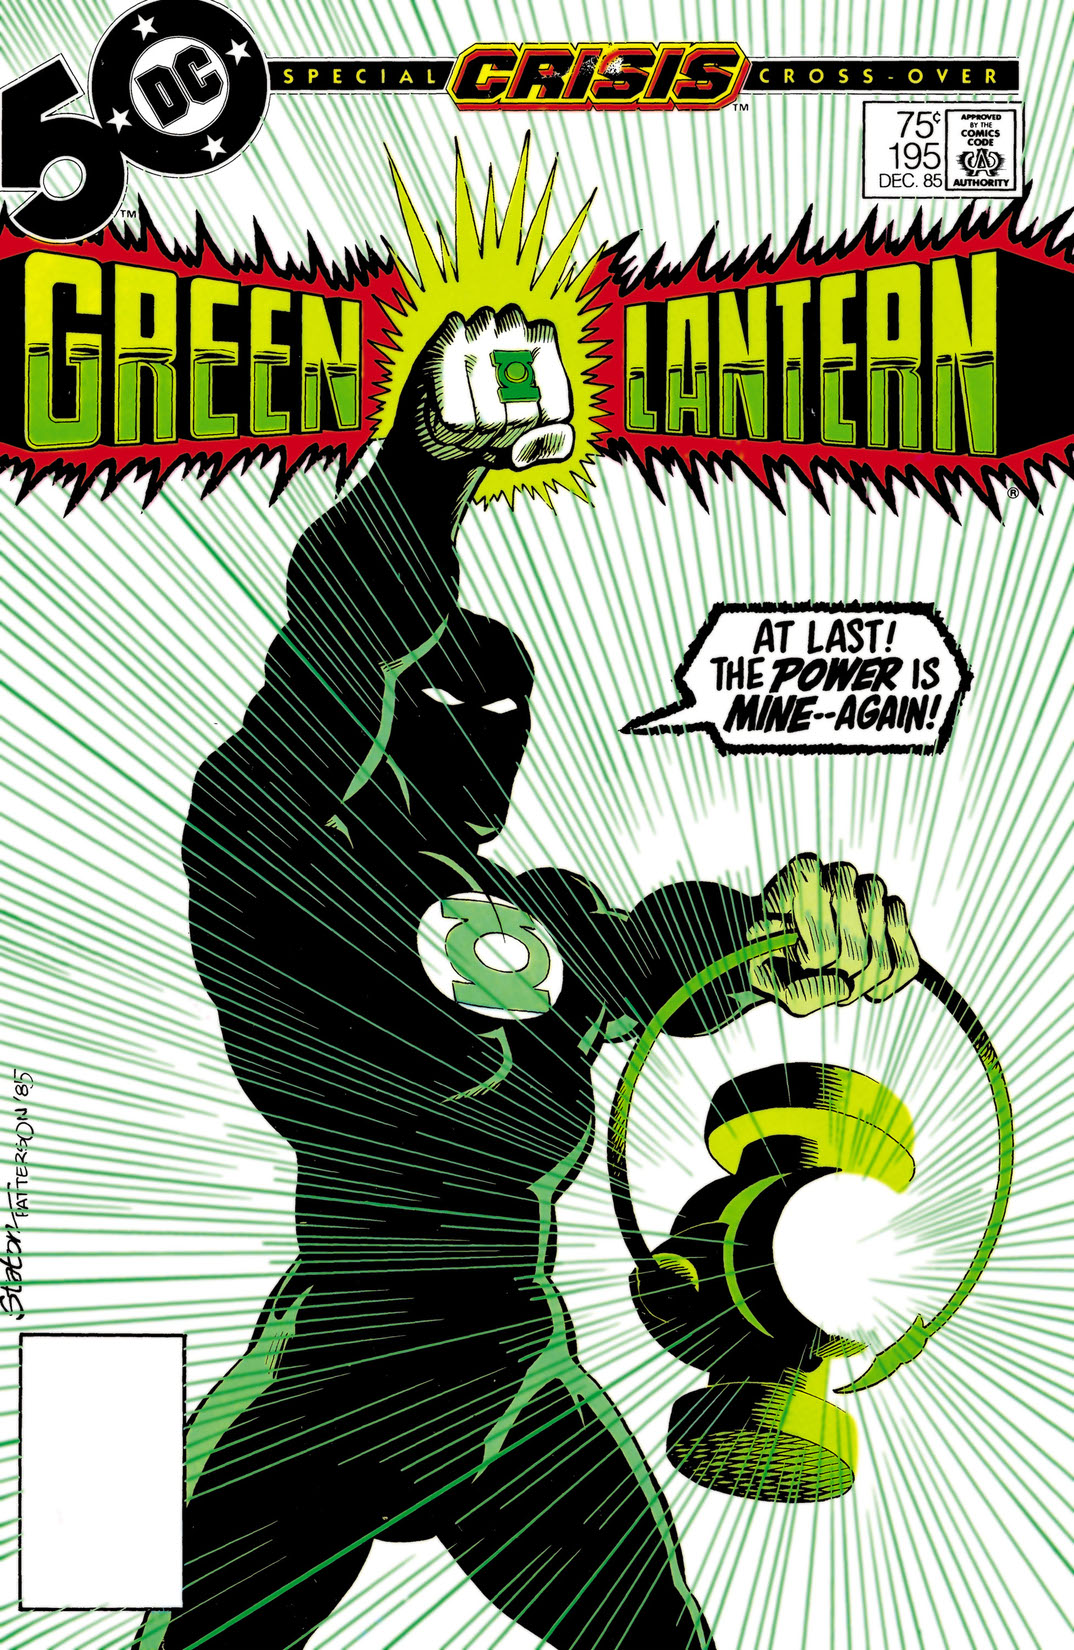 Green Lantern (1960-) #195 preview images